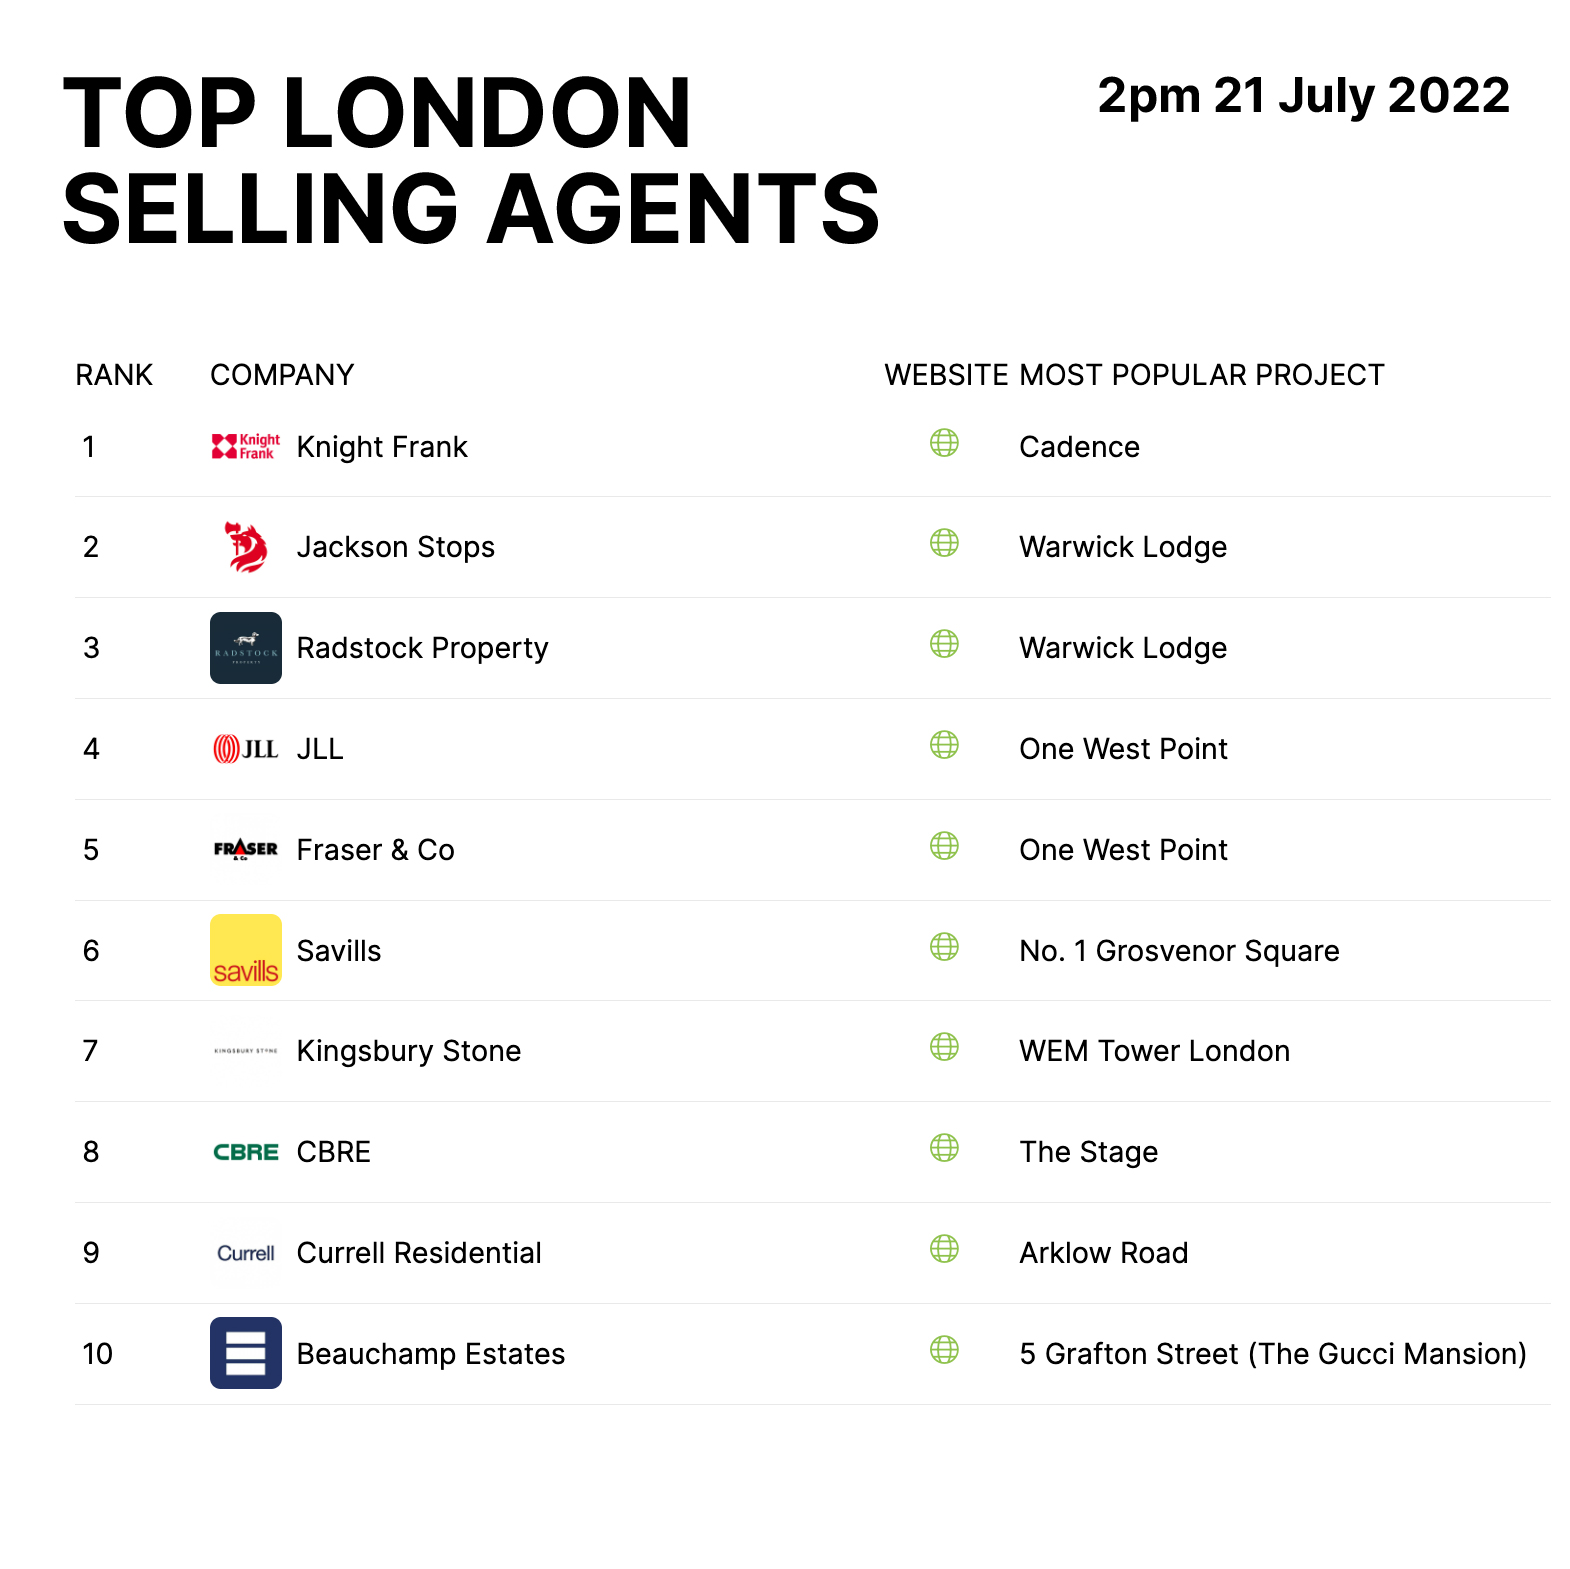 Top London selling agents - Knight Frank